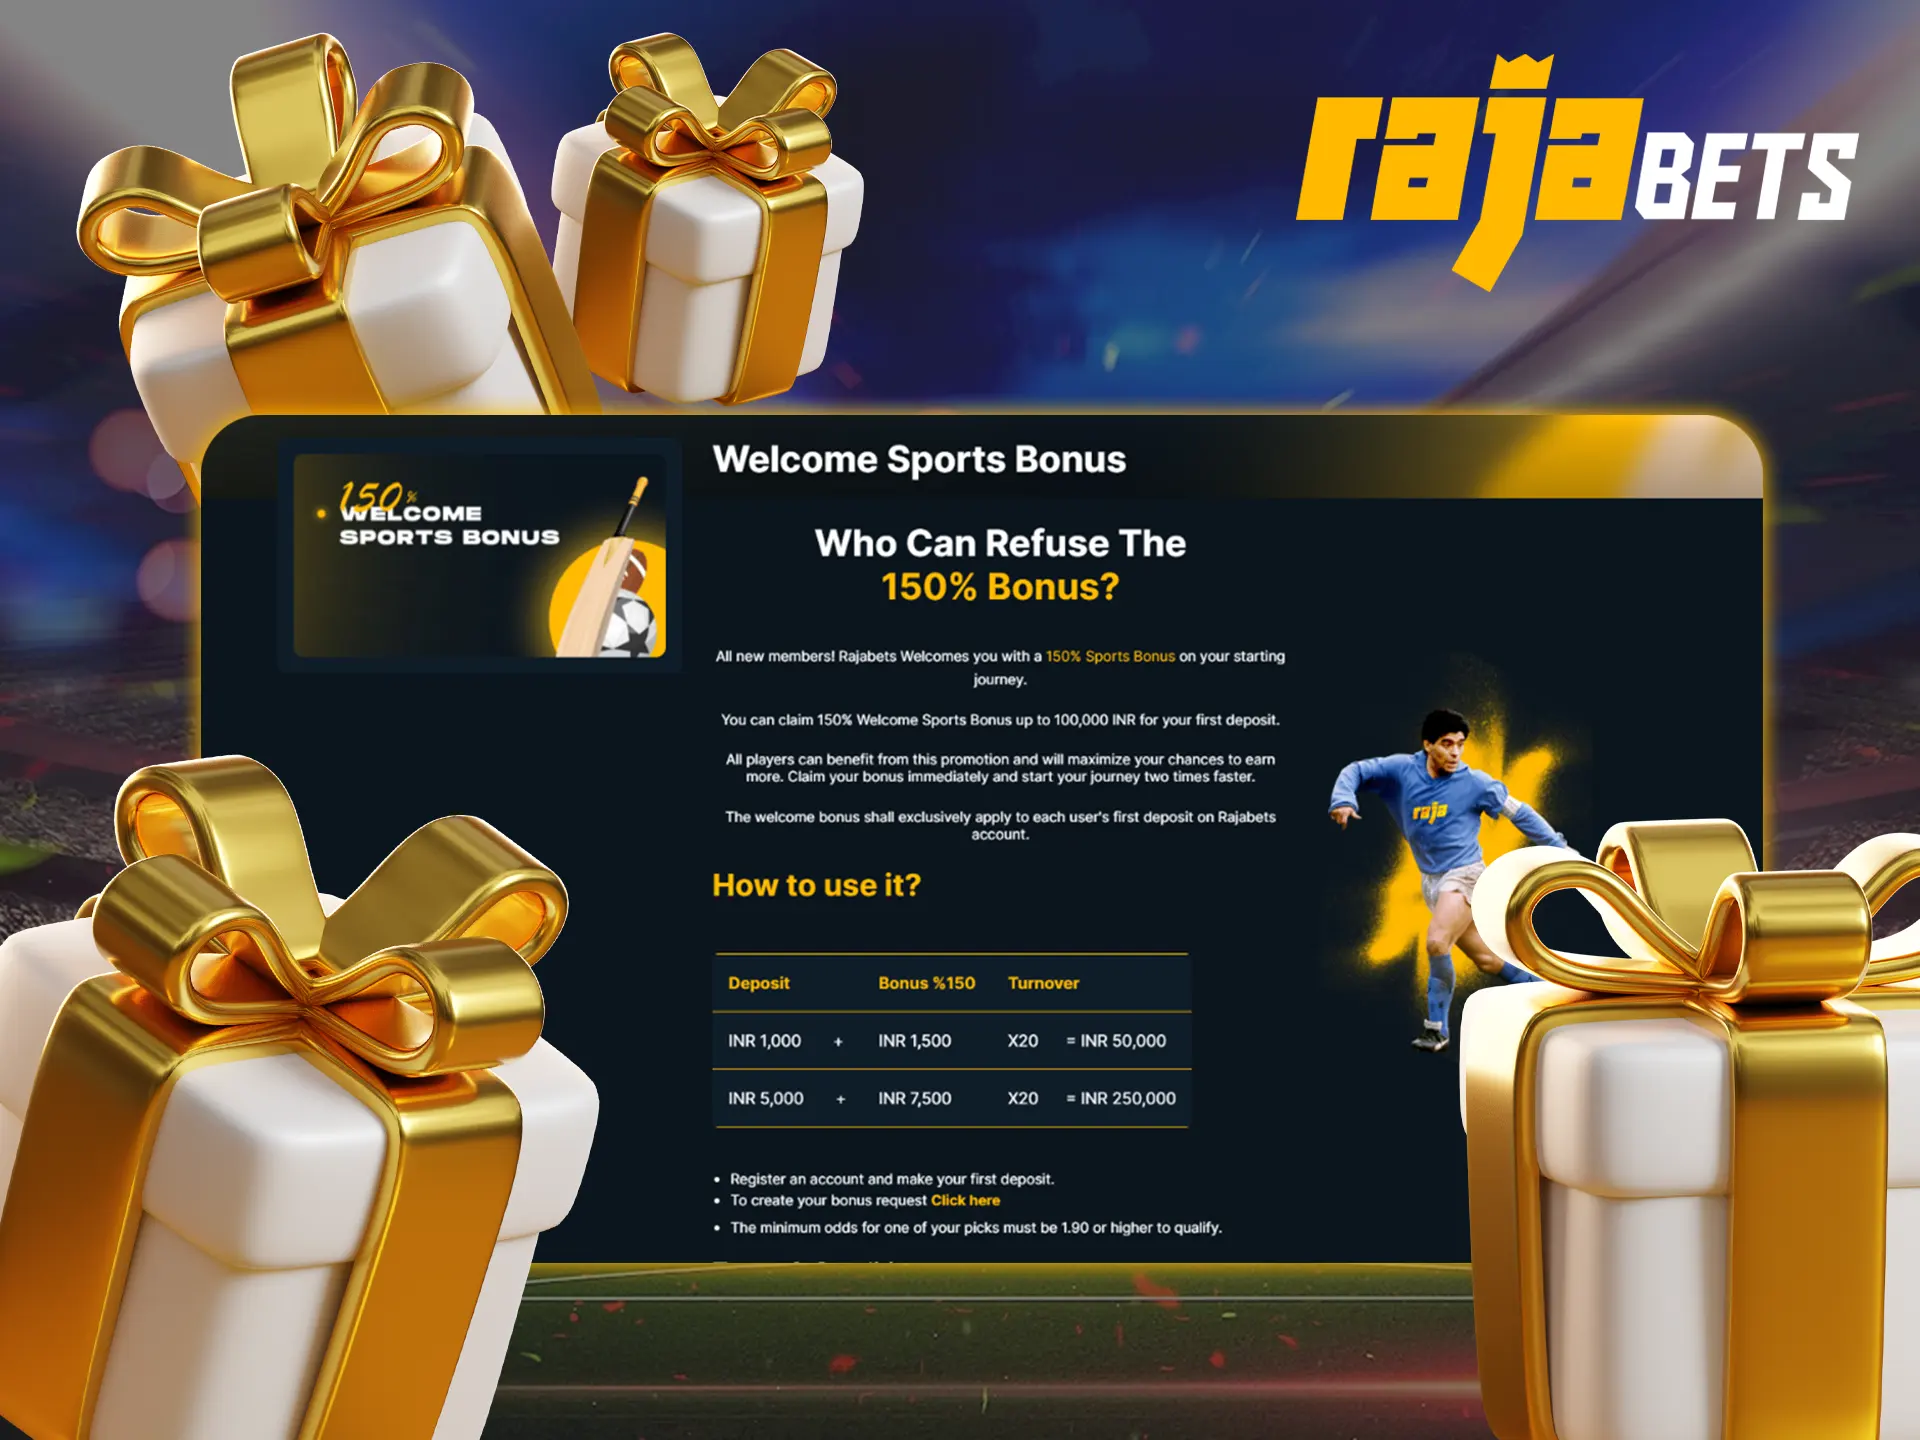 Rajabets gives a generous welcome bonus on football betting.